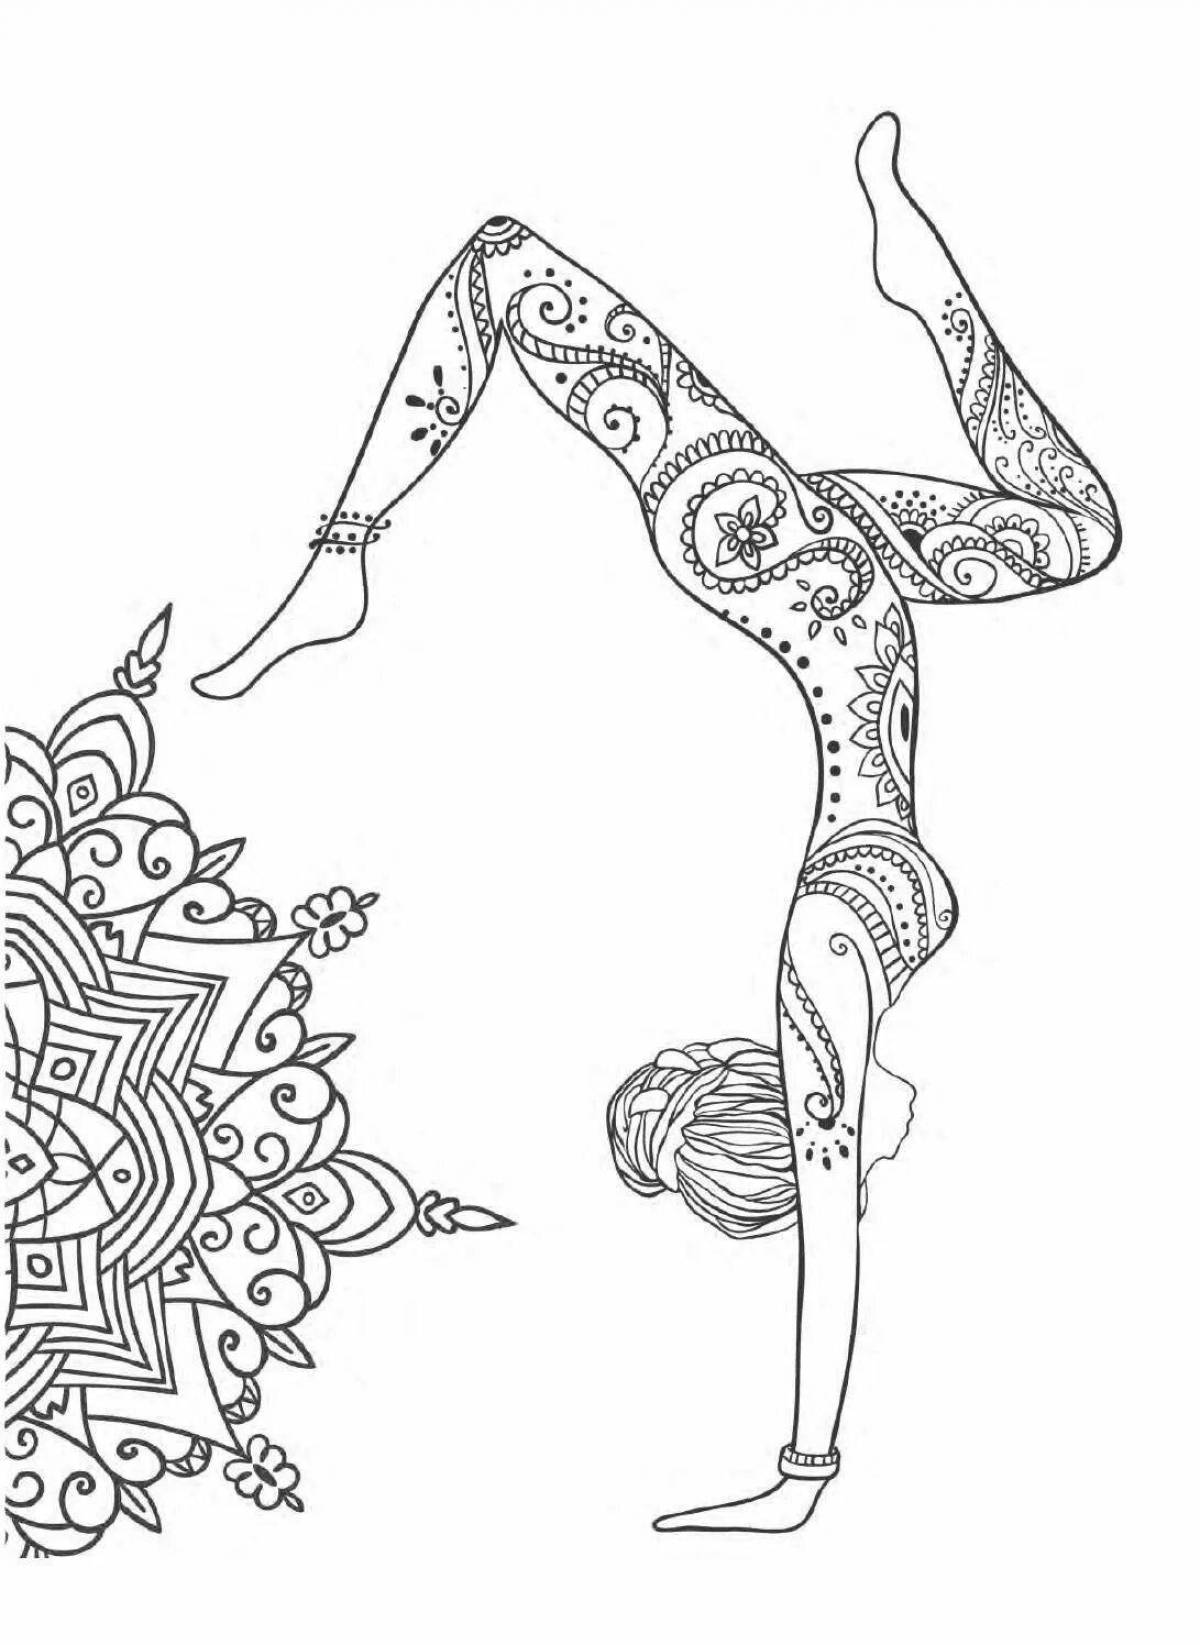 Radiant coloring page antistress ballerina